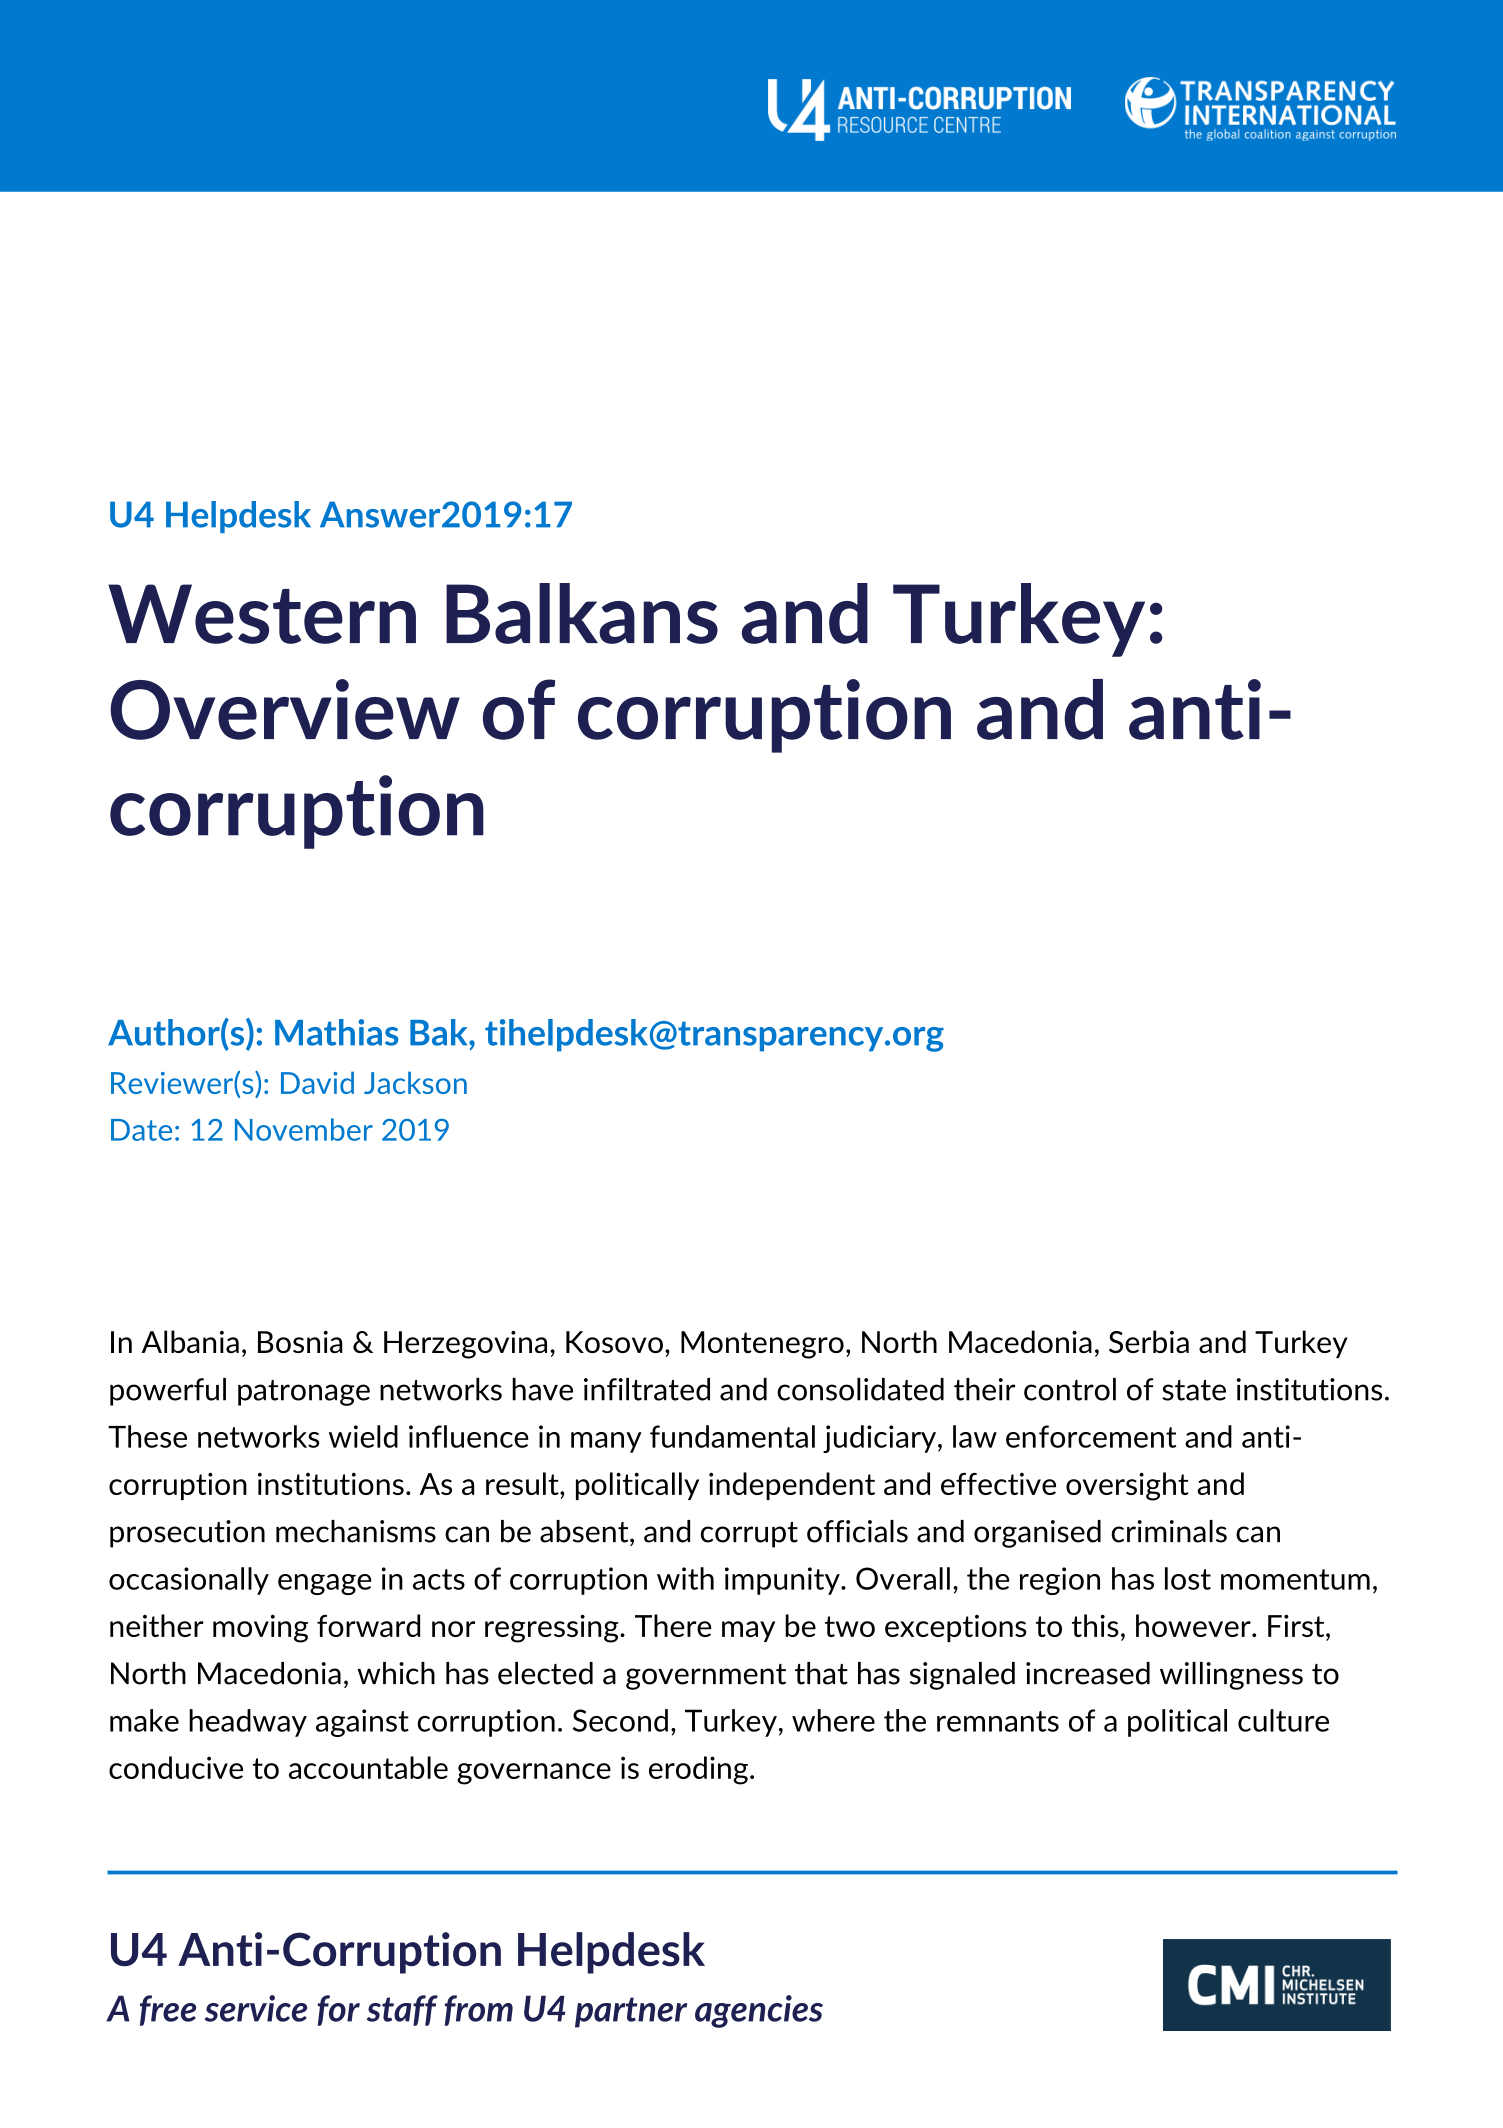 Western Balkans and Turkey: Overview of corruption and anti-corruption